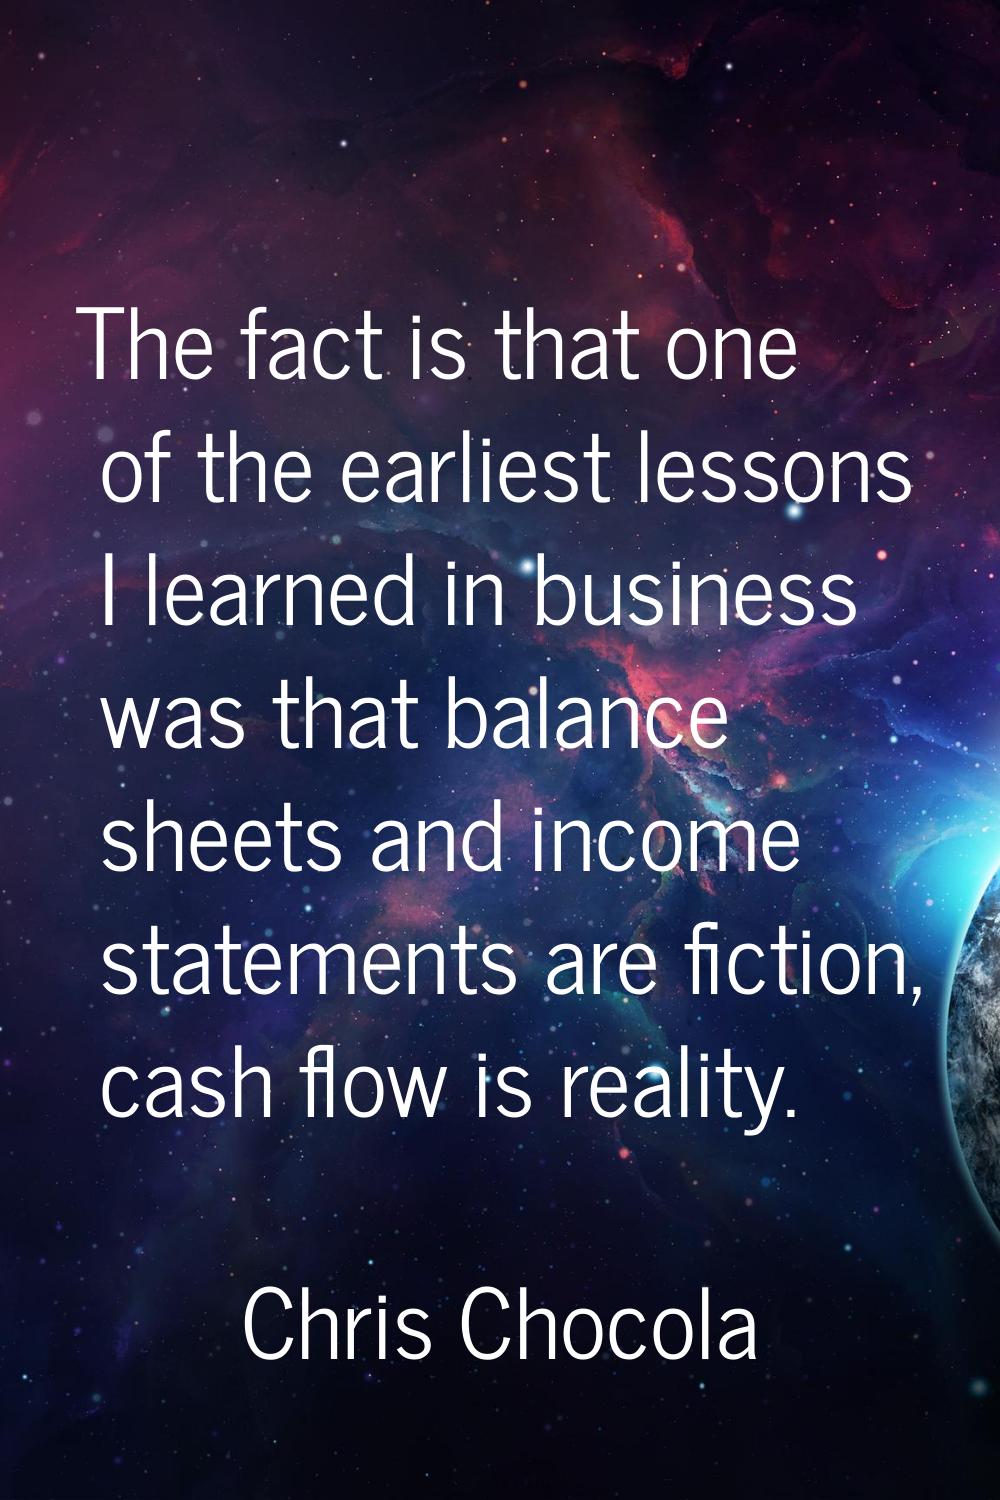 The fact is that one of the earliest lessons I learned in business was that balance sheets and inco